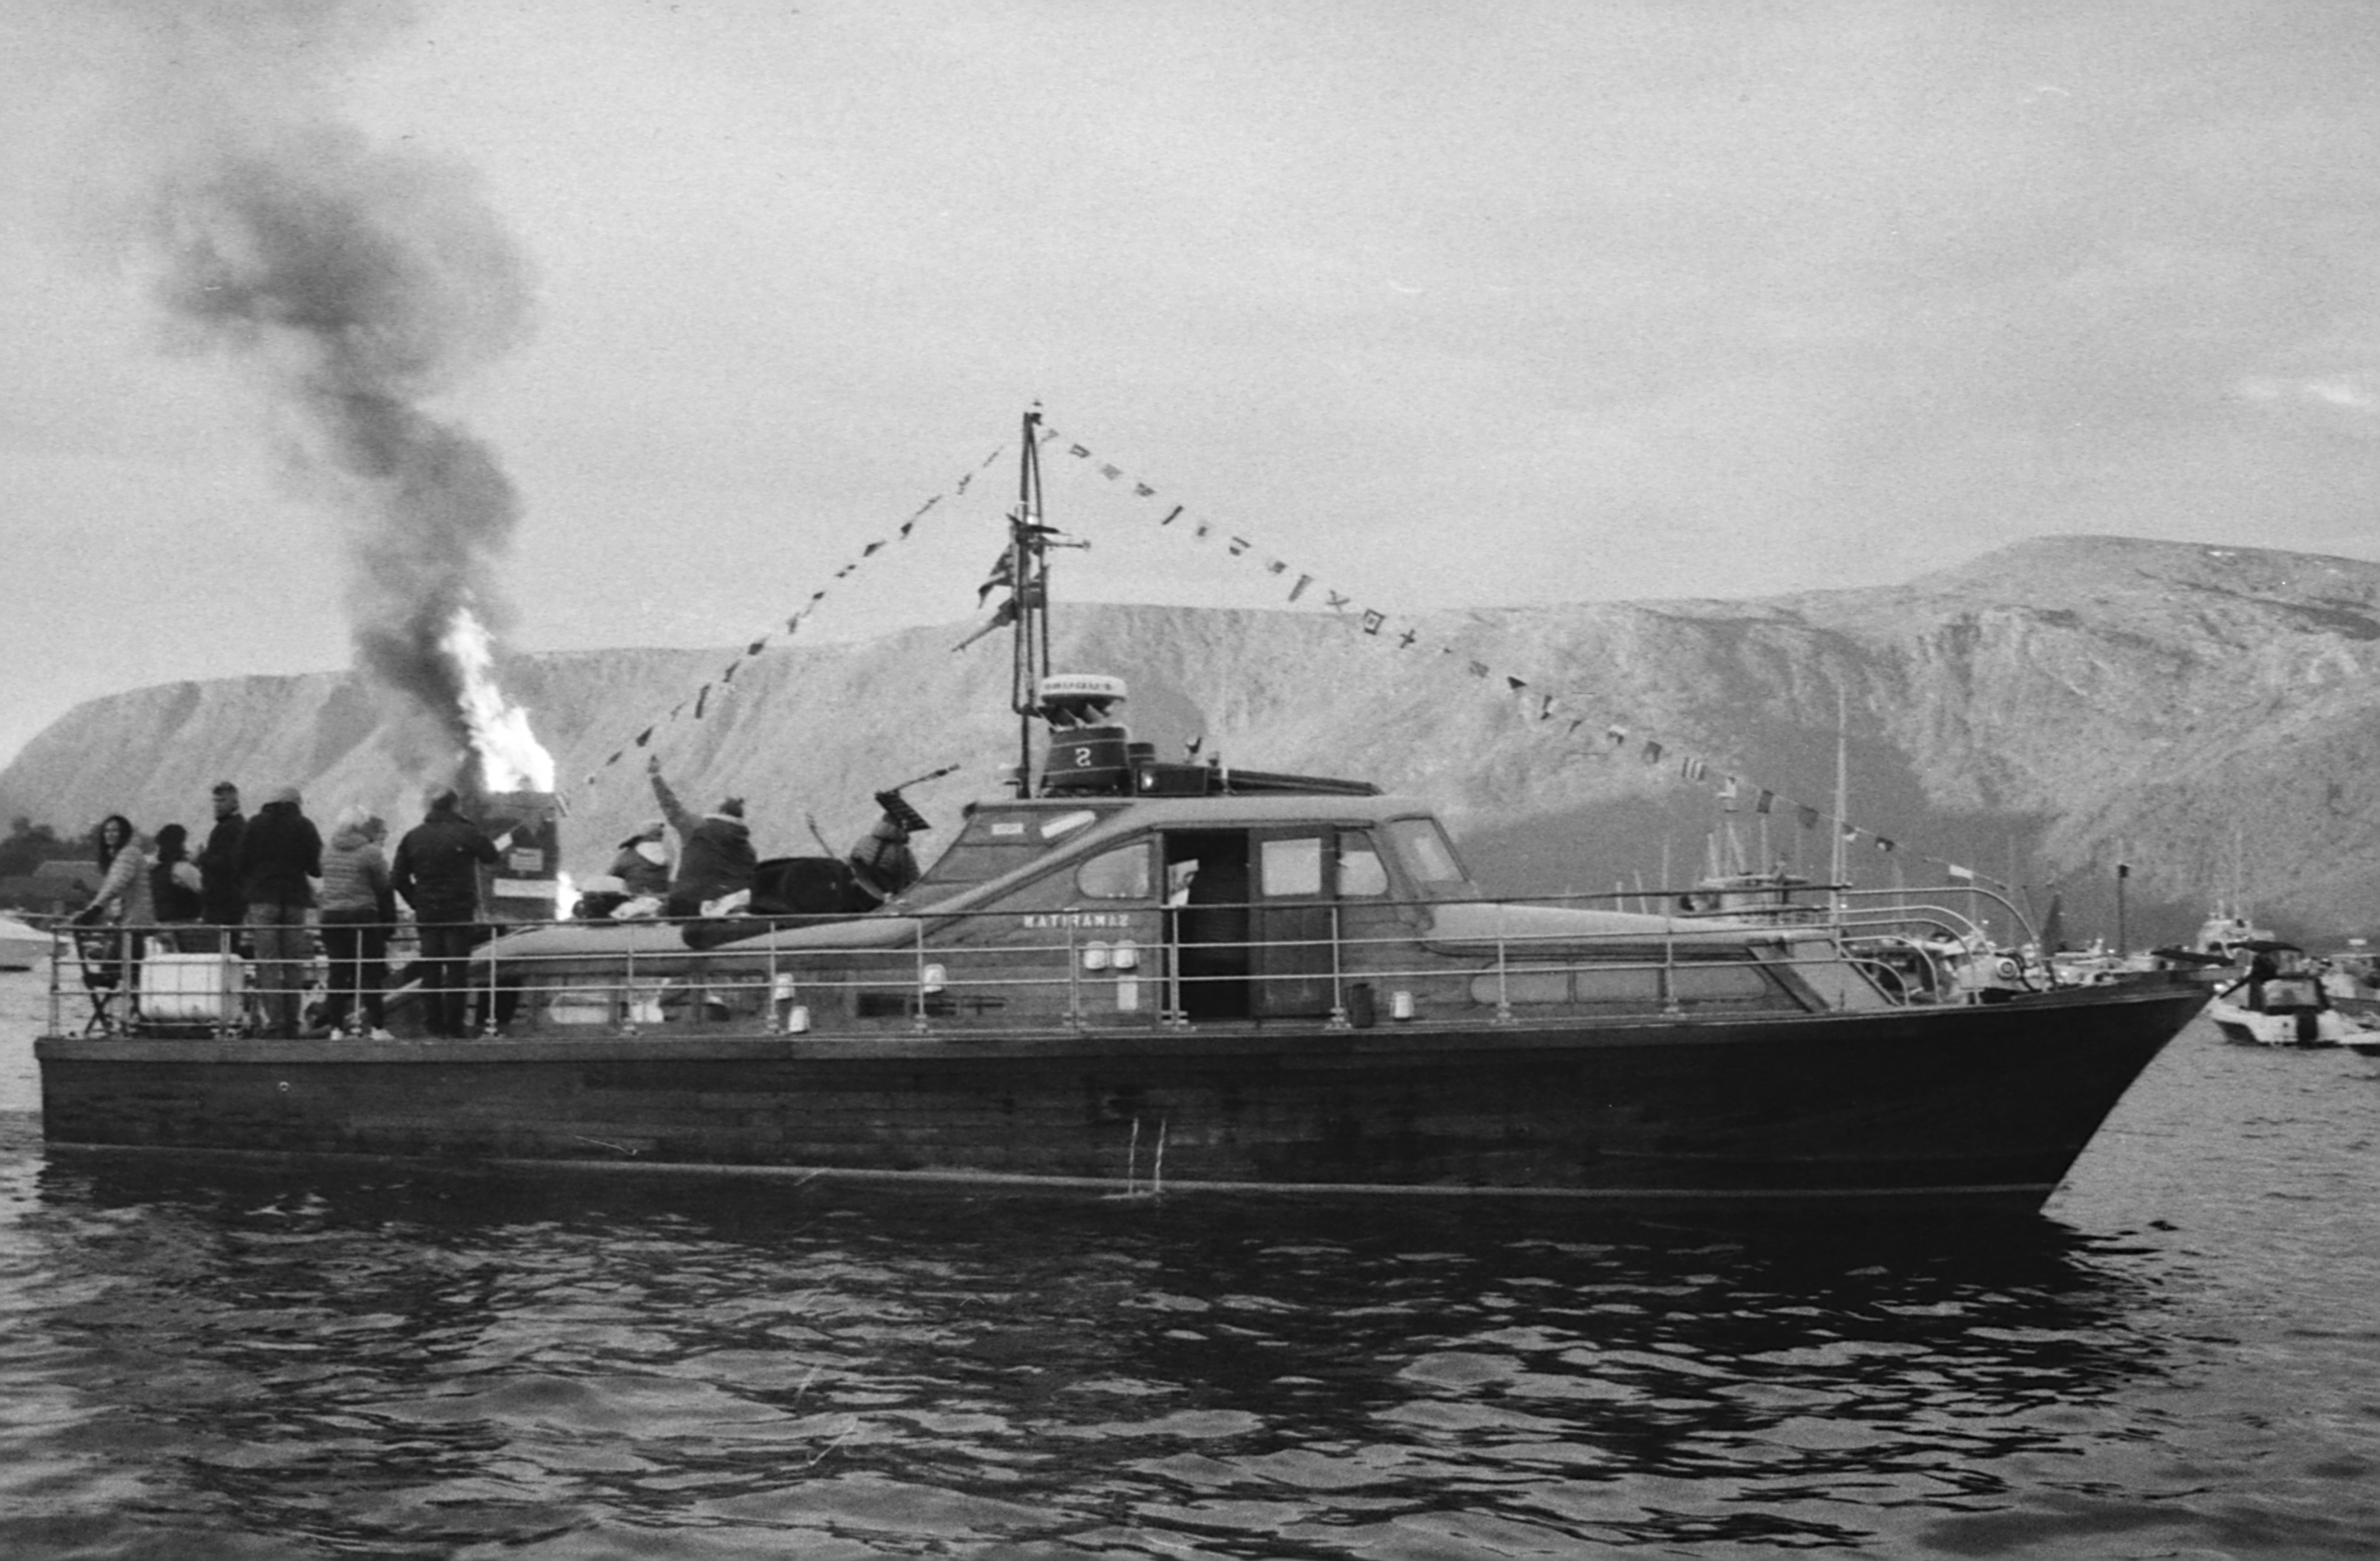 Black and white picture of Slinningsbålet and boats